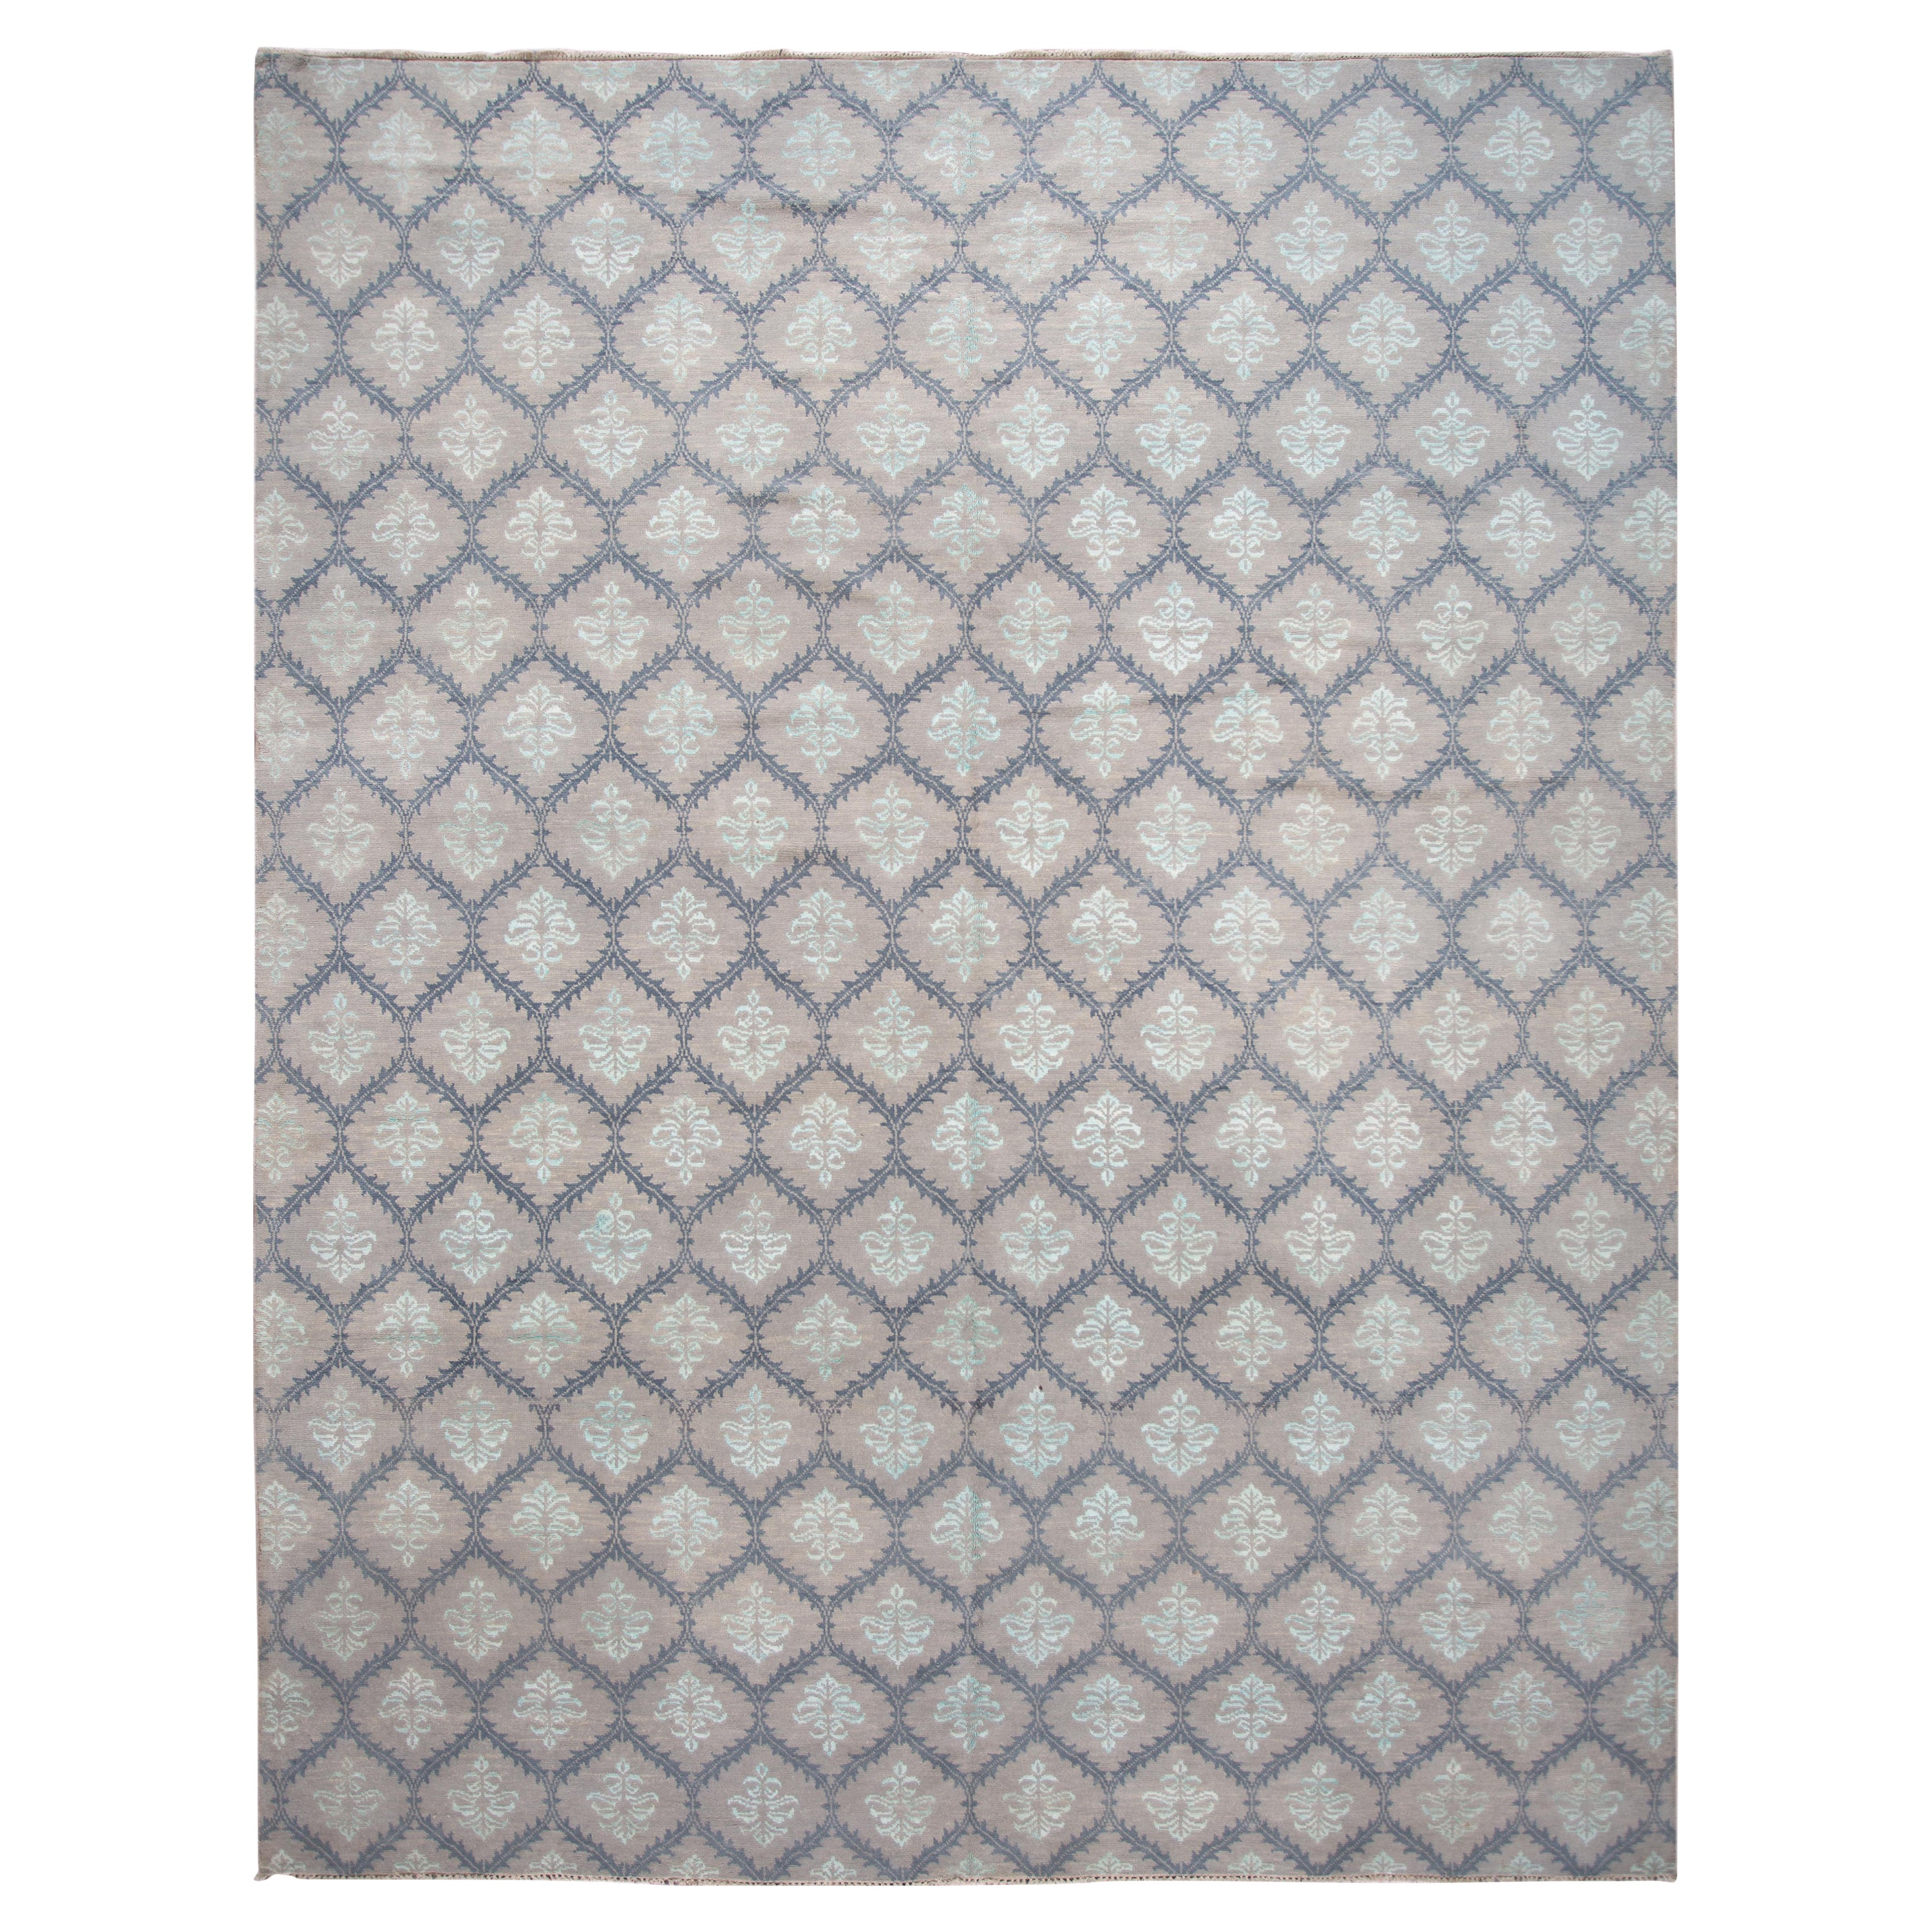 Contemporary Wool & Silk Rug in Gray Tones with a Modern Geometric Pattern